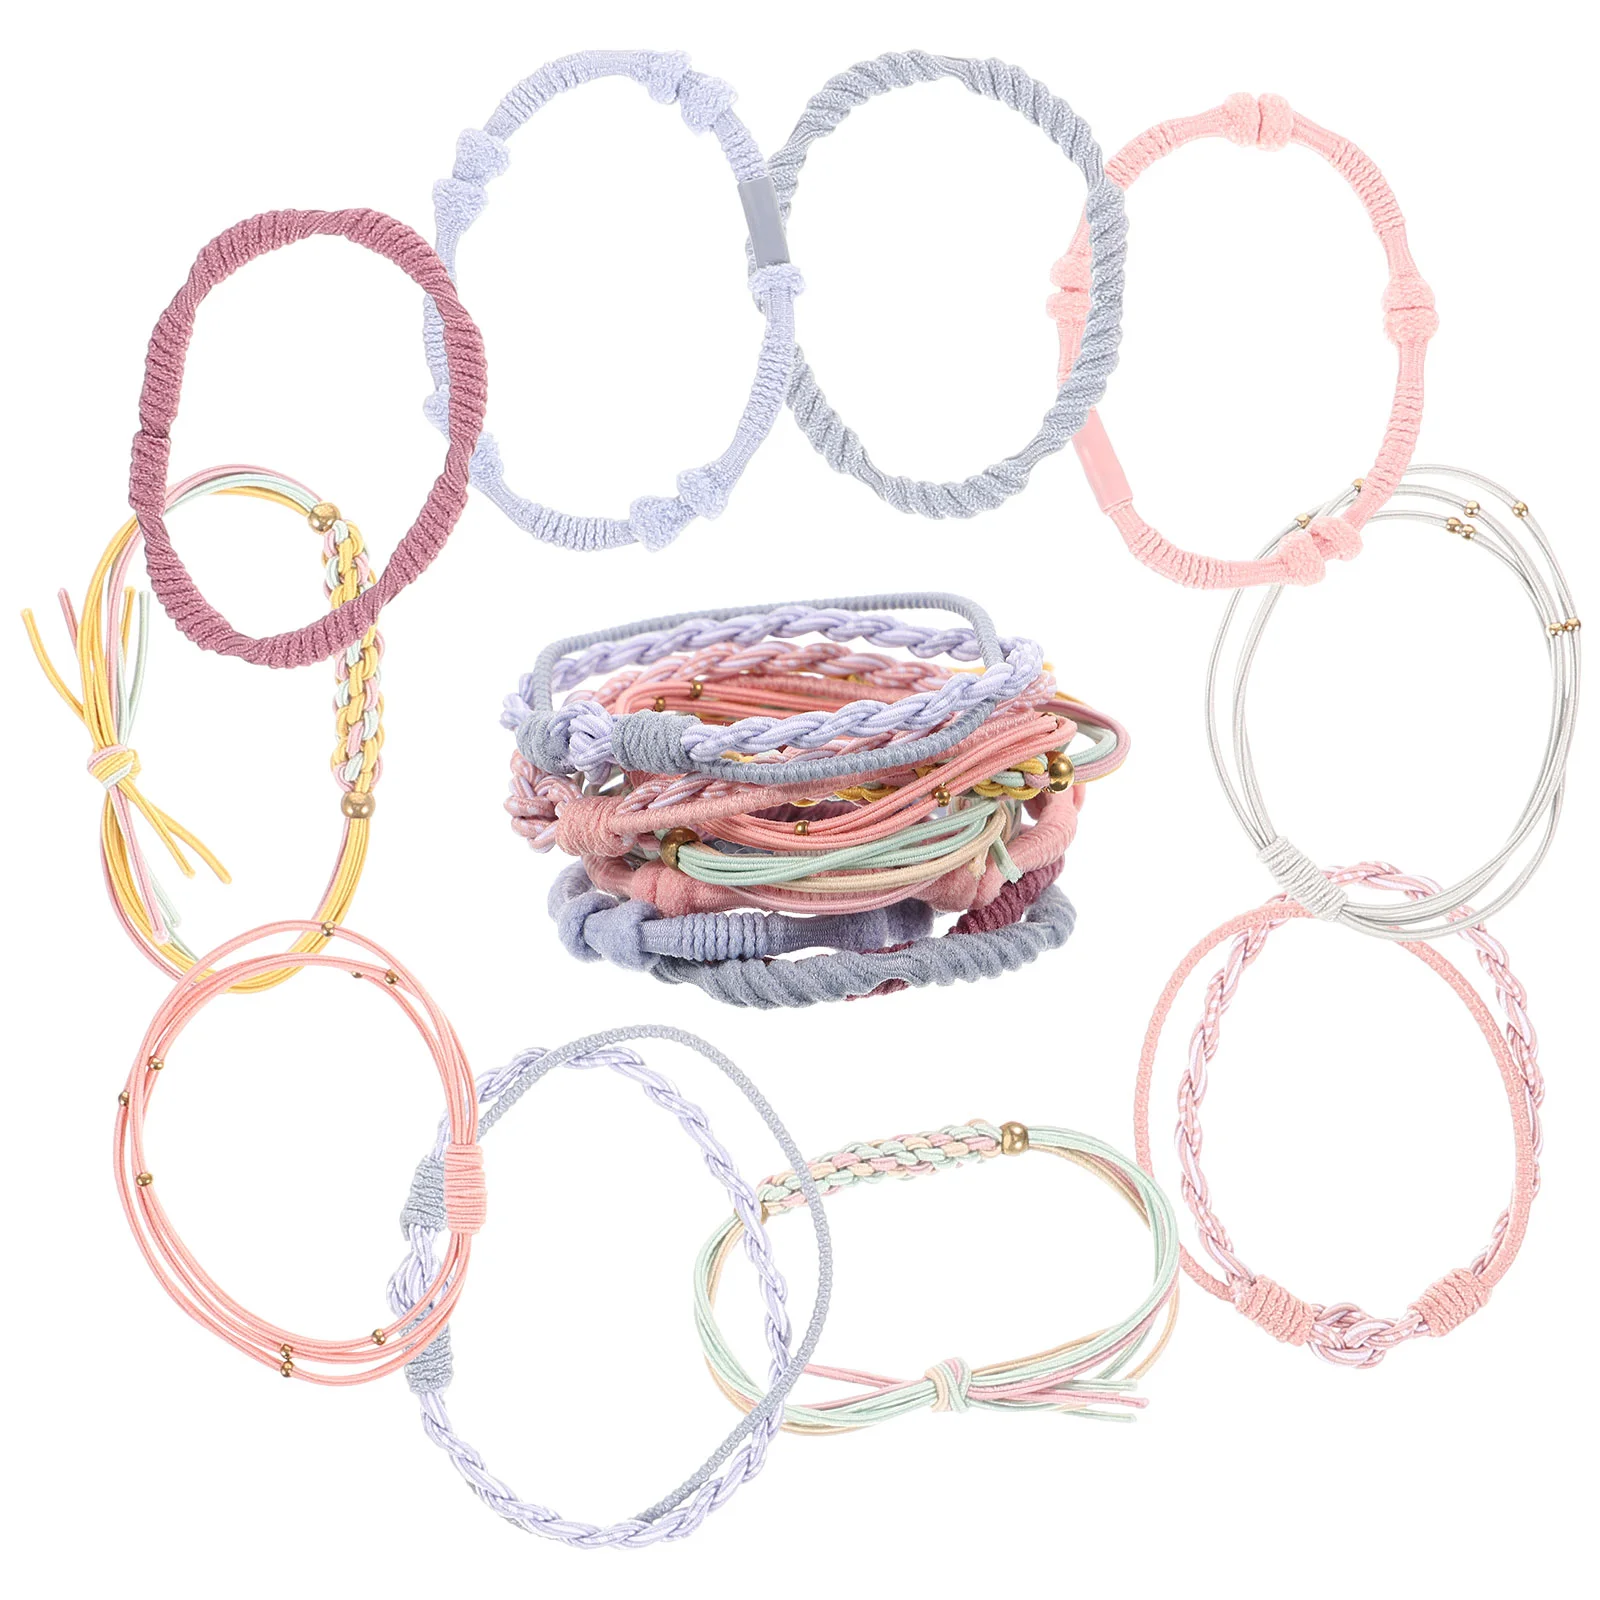 

20pcs Women Hair Ropes Bohemian Hair Accessories Pony Tail Holders Rubber Bands for Hair